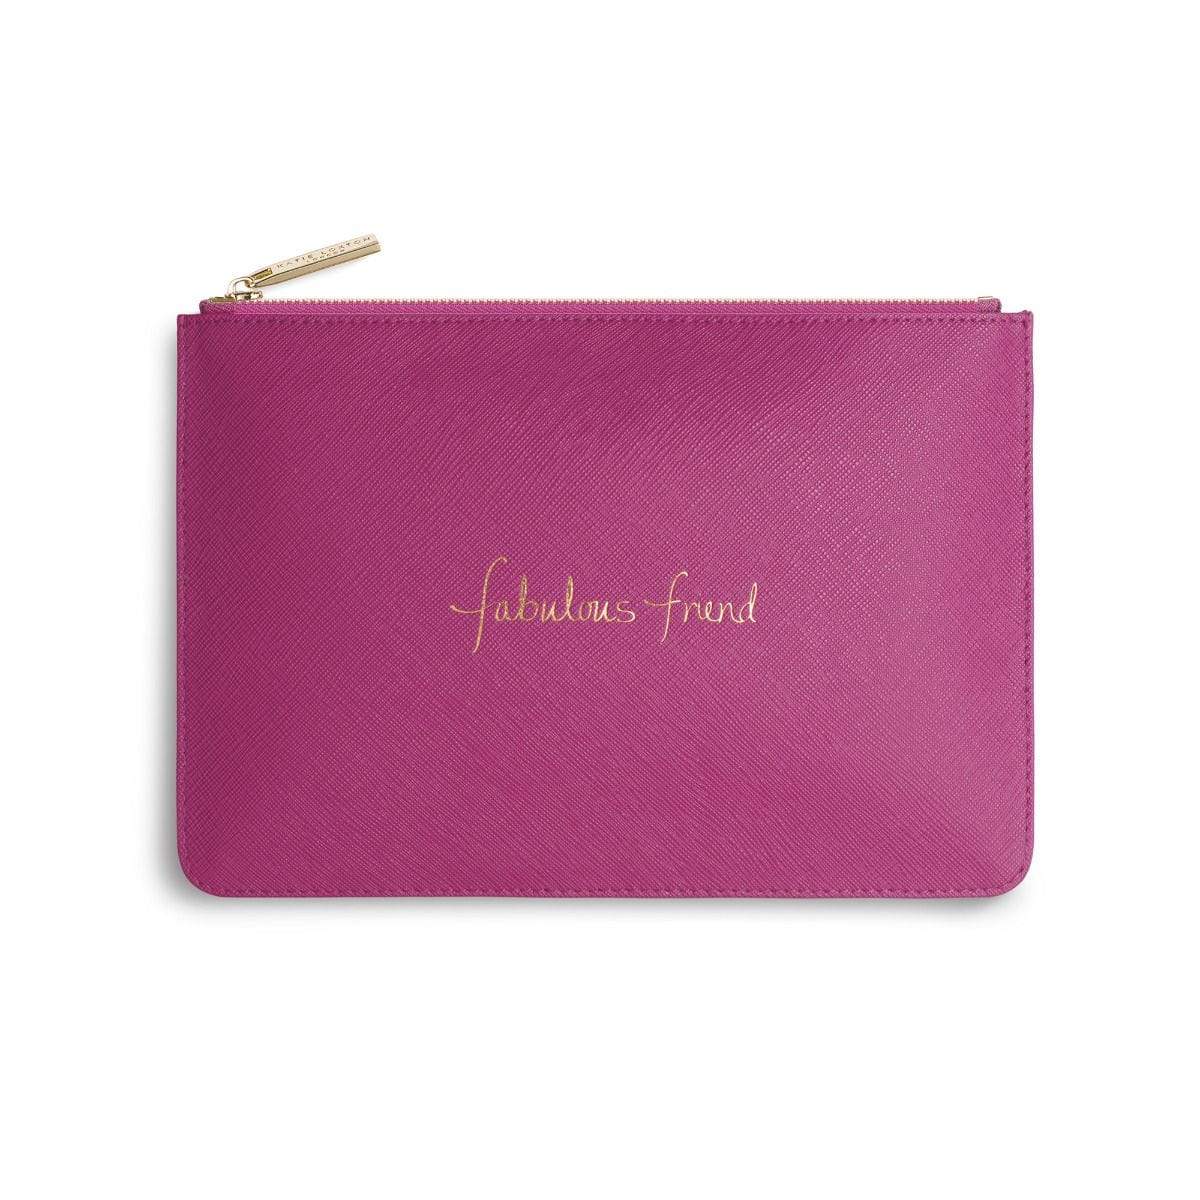 Katie Loxton Gifts One Size Copy of Katie Loxton S Fabulous Friend Perfect Pouch in Purple KLB207 izzi-of-baslow